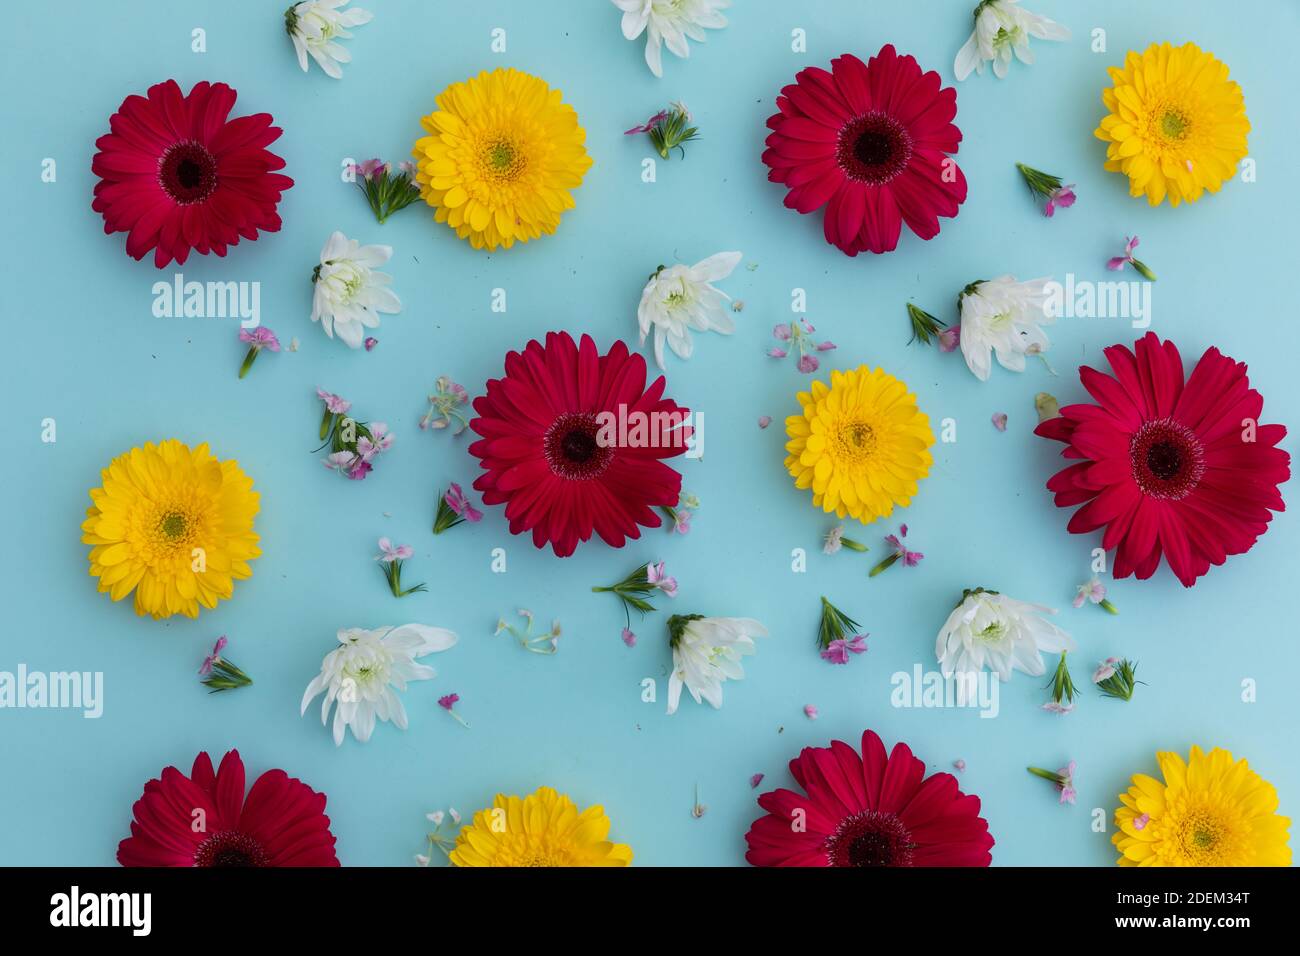 Yellow and red gerberas and white flowers on blue background Stock Photo